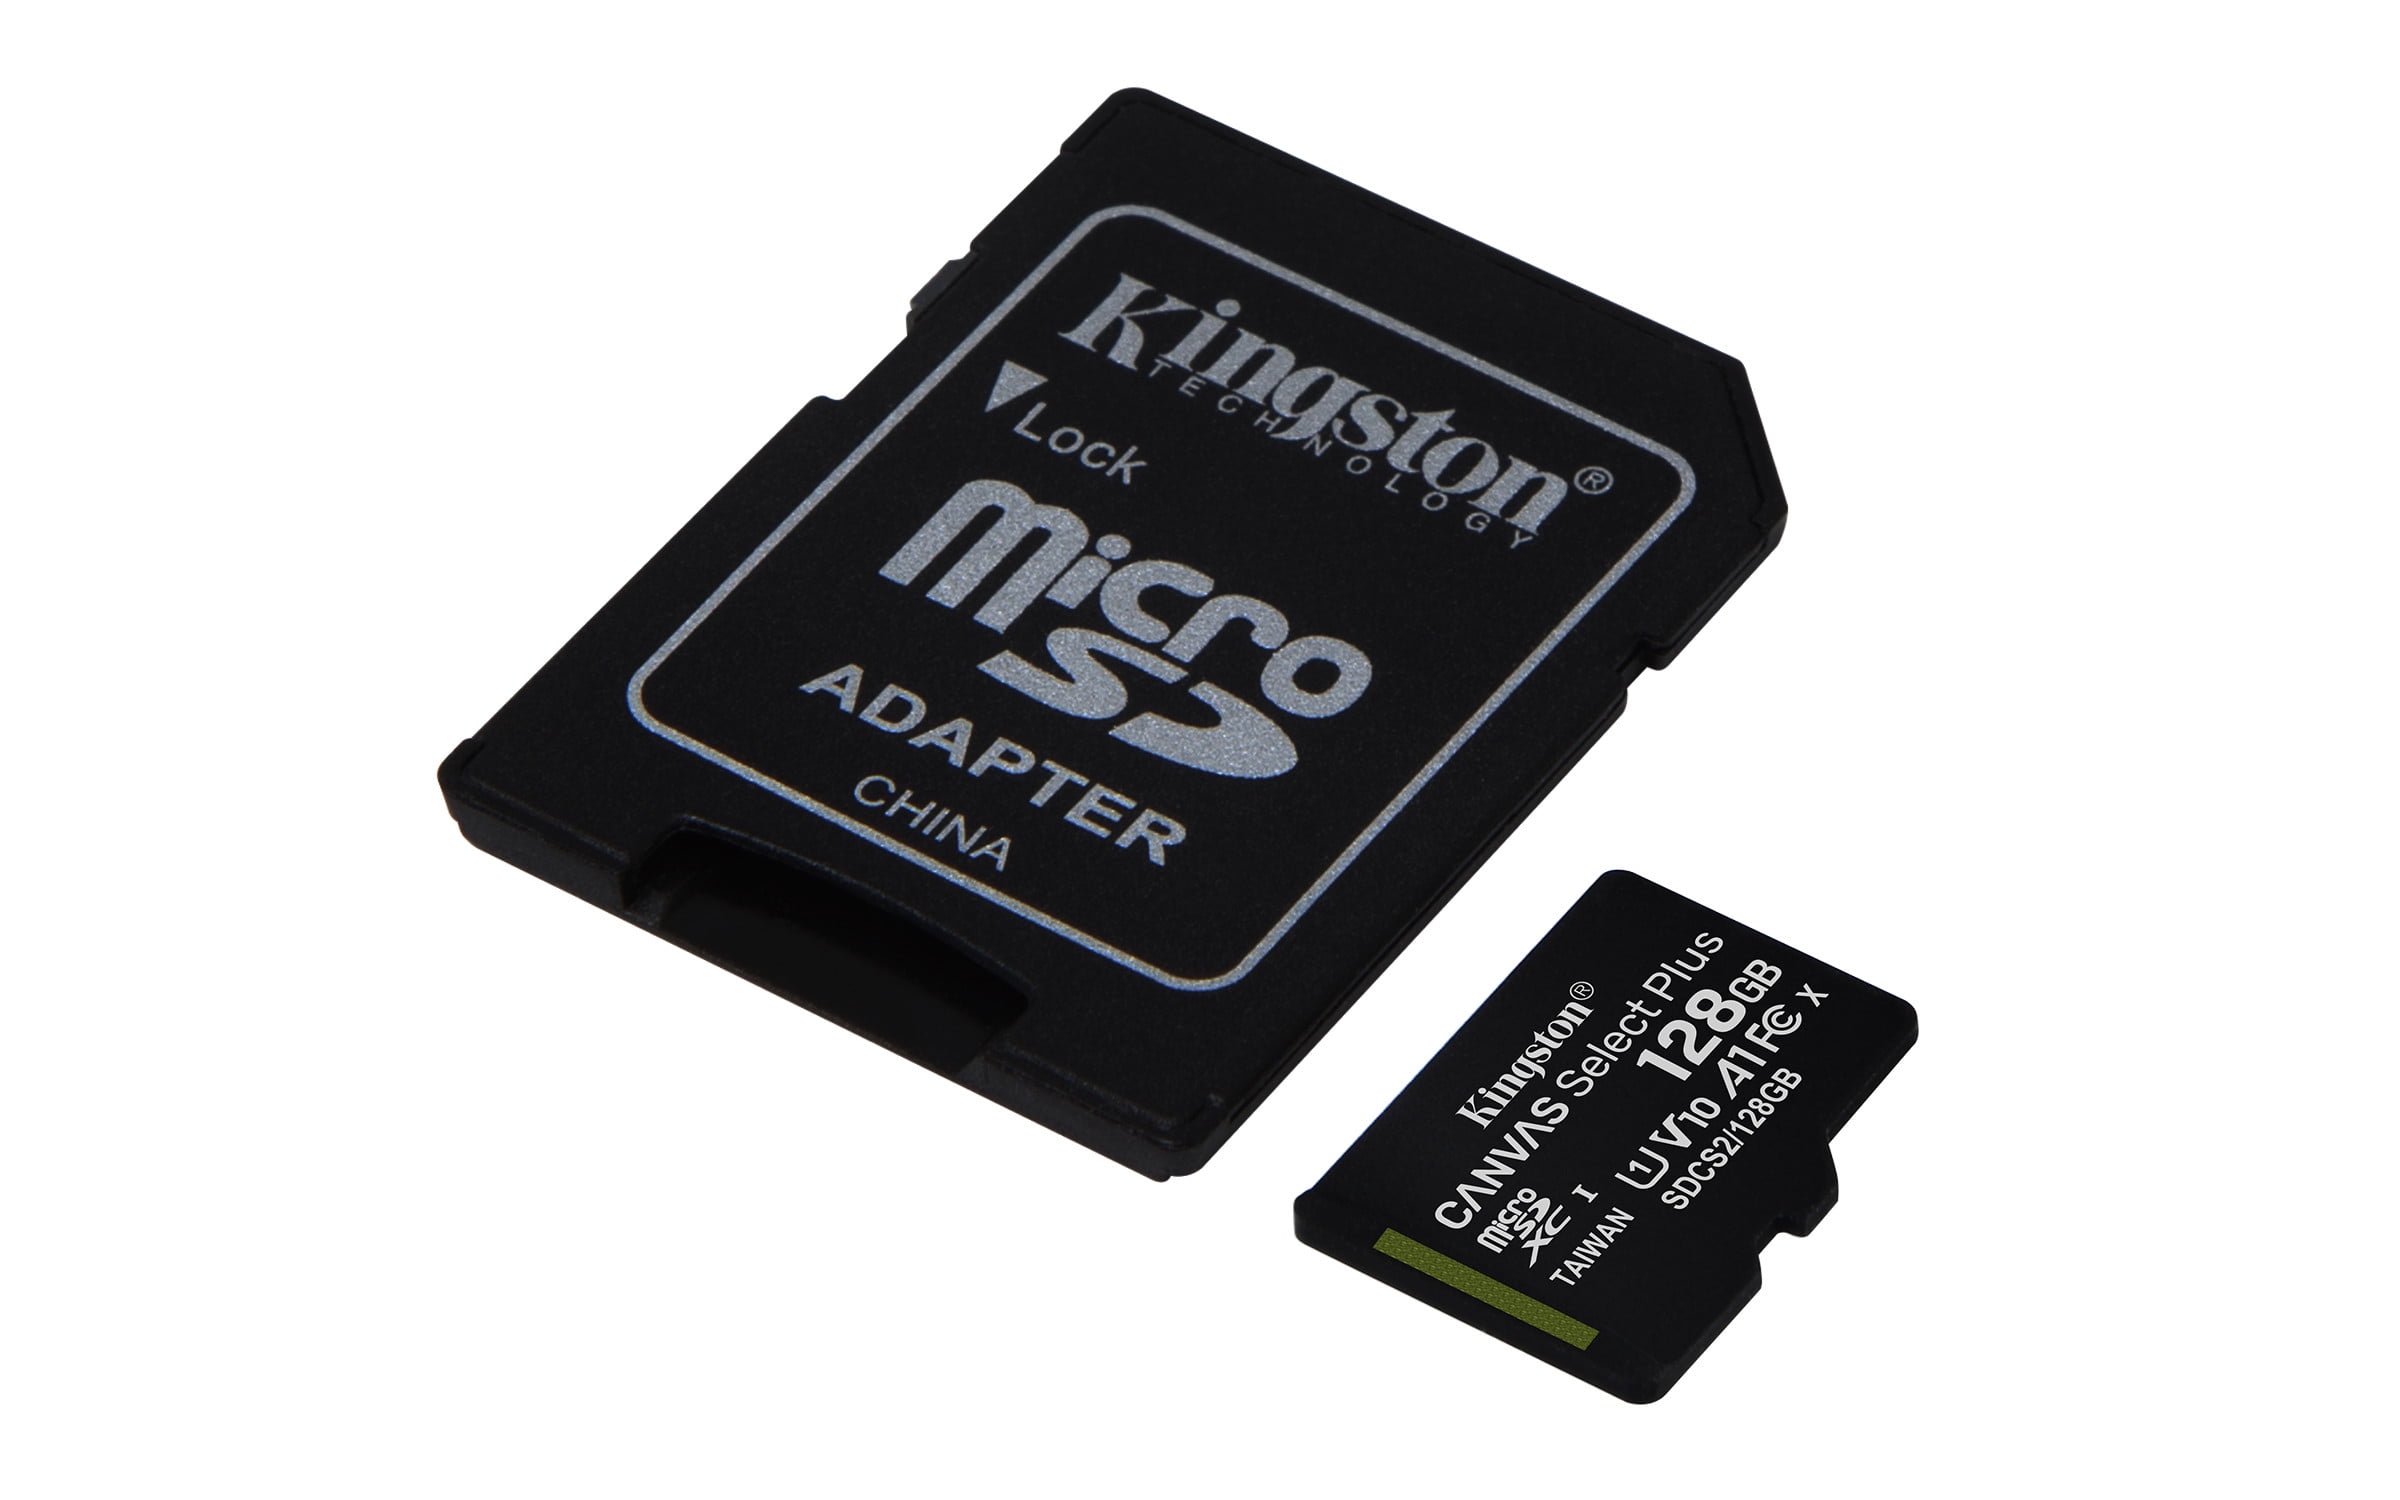 100MBs Works with Kingston Kingston 128GB Samsung SM-T217S MicroSDXC Canvas Select Plus Card Verified by SanFlash. 